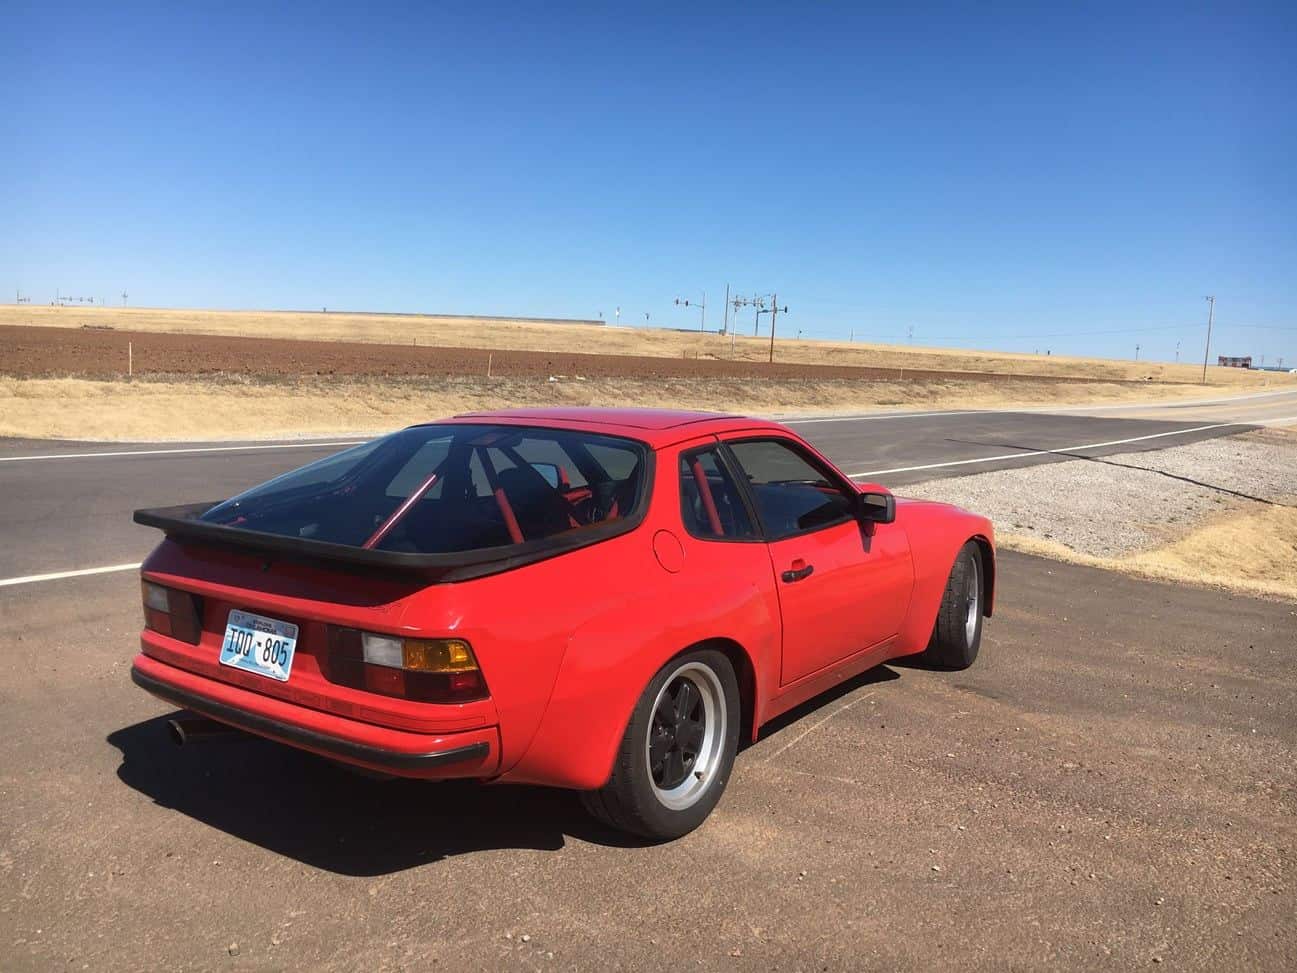 1987 Porsche 924 - 924 Carrera GT replica based on 87 924s - Used - VIN WP0AA0927HN451205 - 125,000 Miles - 4 cyl - 2WD - Manual - Coupe - Red - Mustang, OK 73064, United States